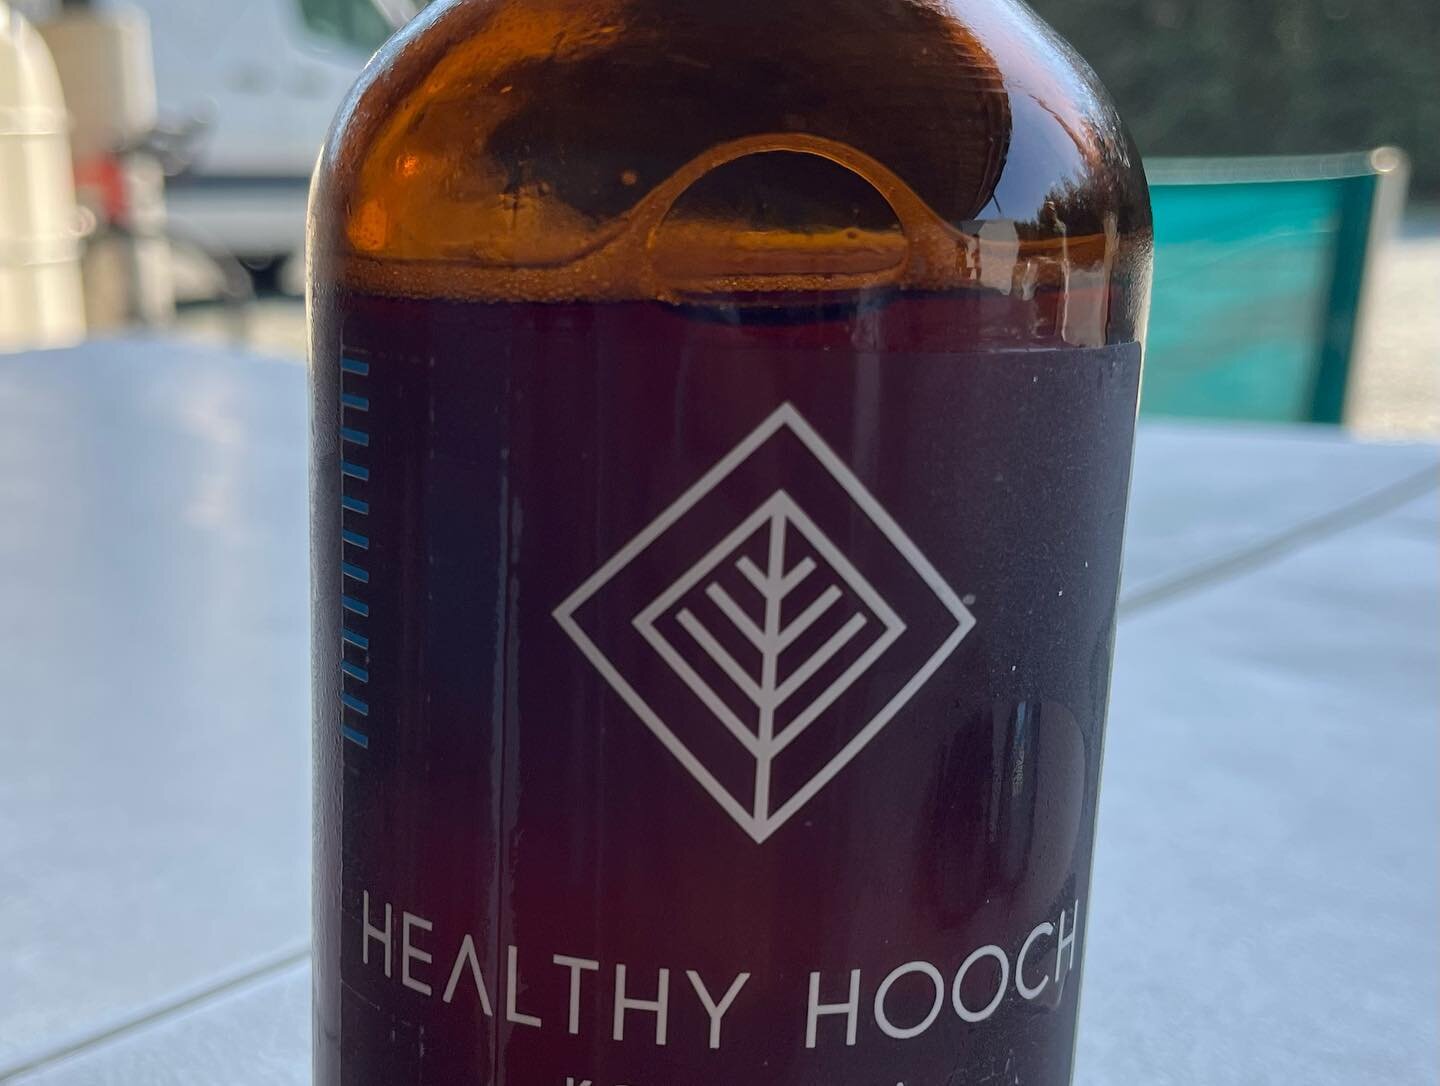 Hey Cyclists (and all our other friends) did you know the world&rsquo;s best Kombucha is made right here in Abbotsford? It&rsquo;s @healthyhooch and the brainchild of cyclists Shoshauna and Will, who hosted #lakecitycycleclub for a great club ride! I